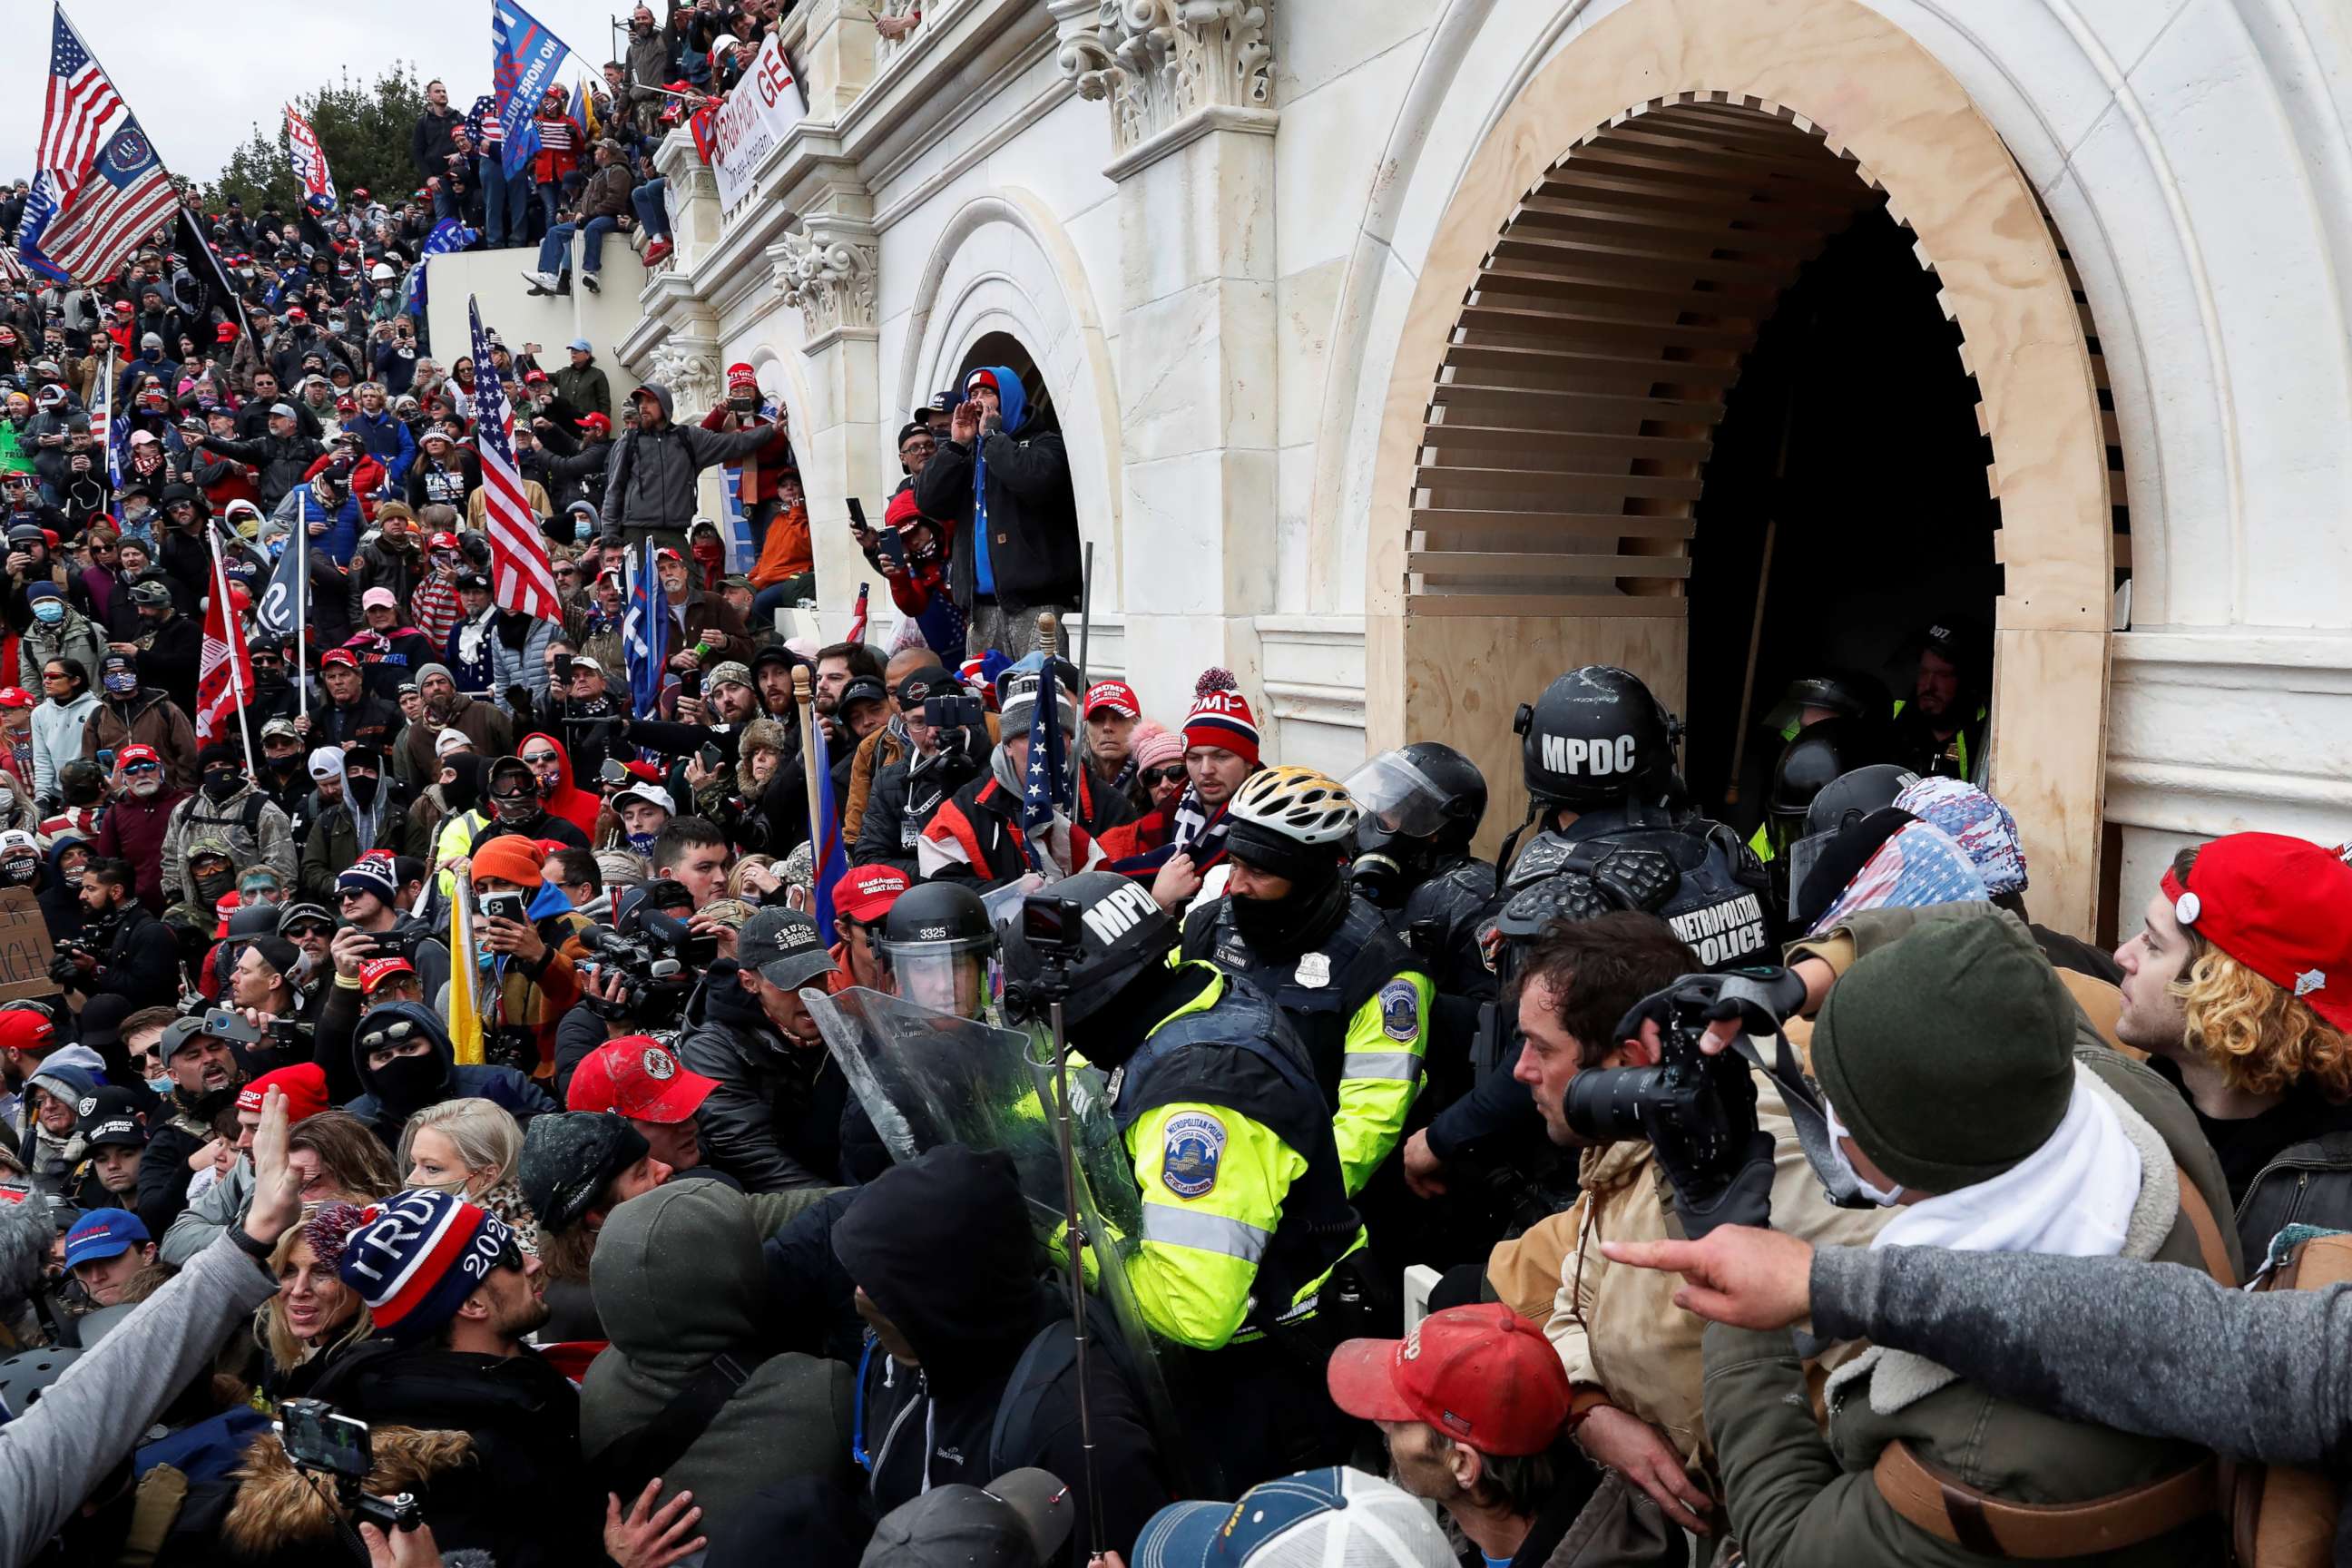 PHOTO: Pro-Trump protesters clash with police during a rally at the U.S. Capitol Building in Washington, D.C., Jan. 6, 2021. 